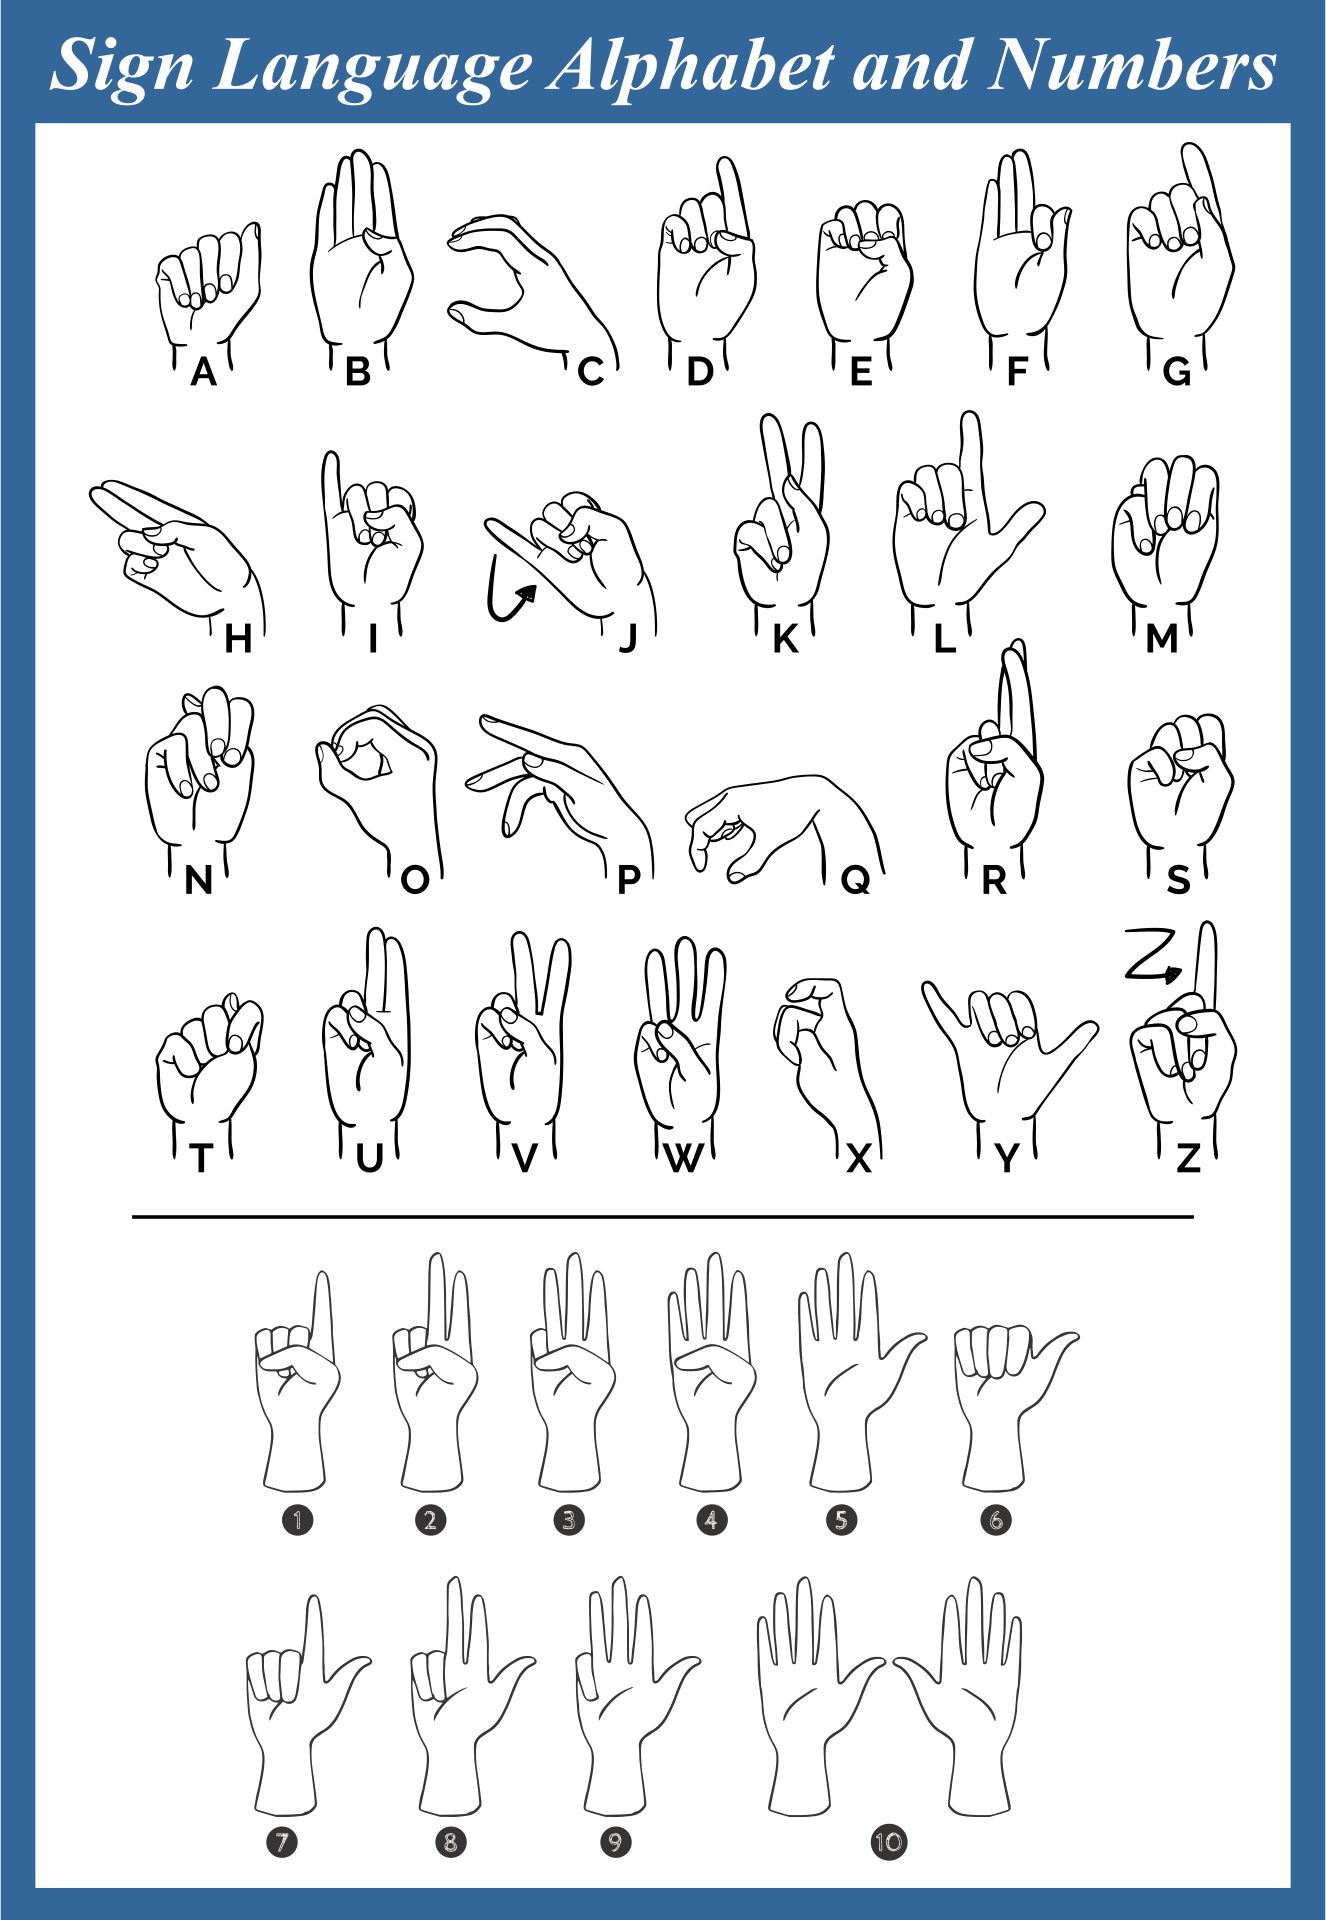 Sign Language Alphabet And Numbers